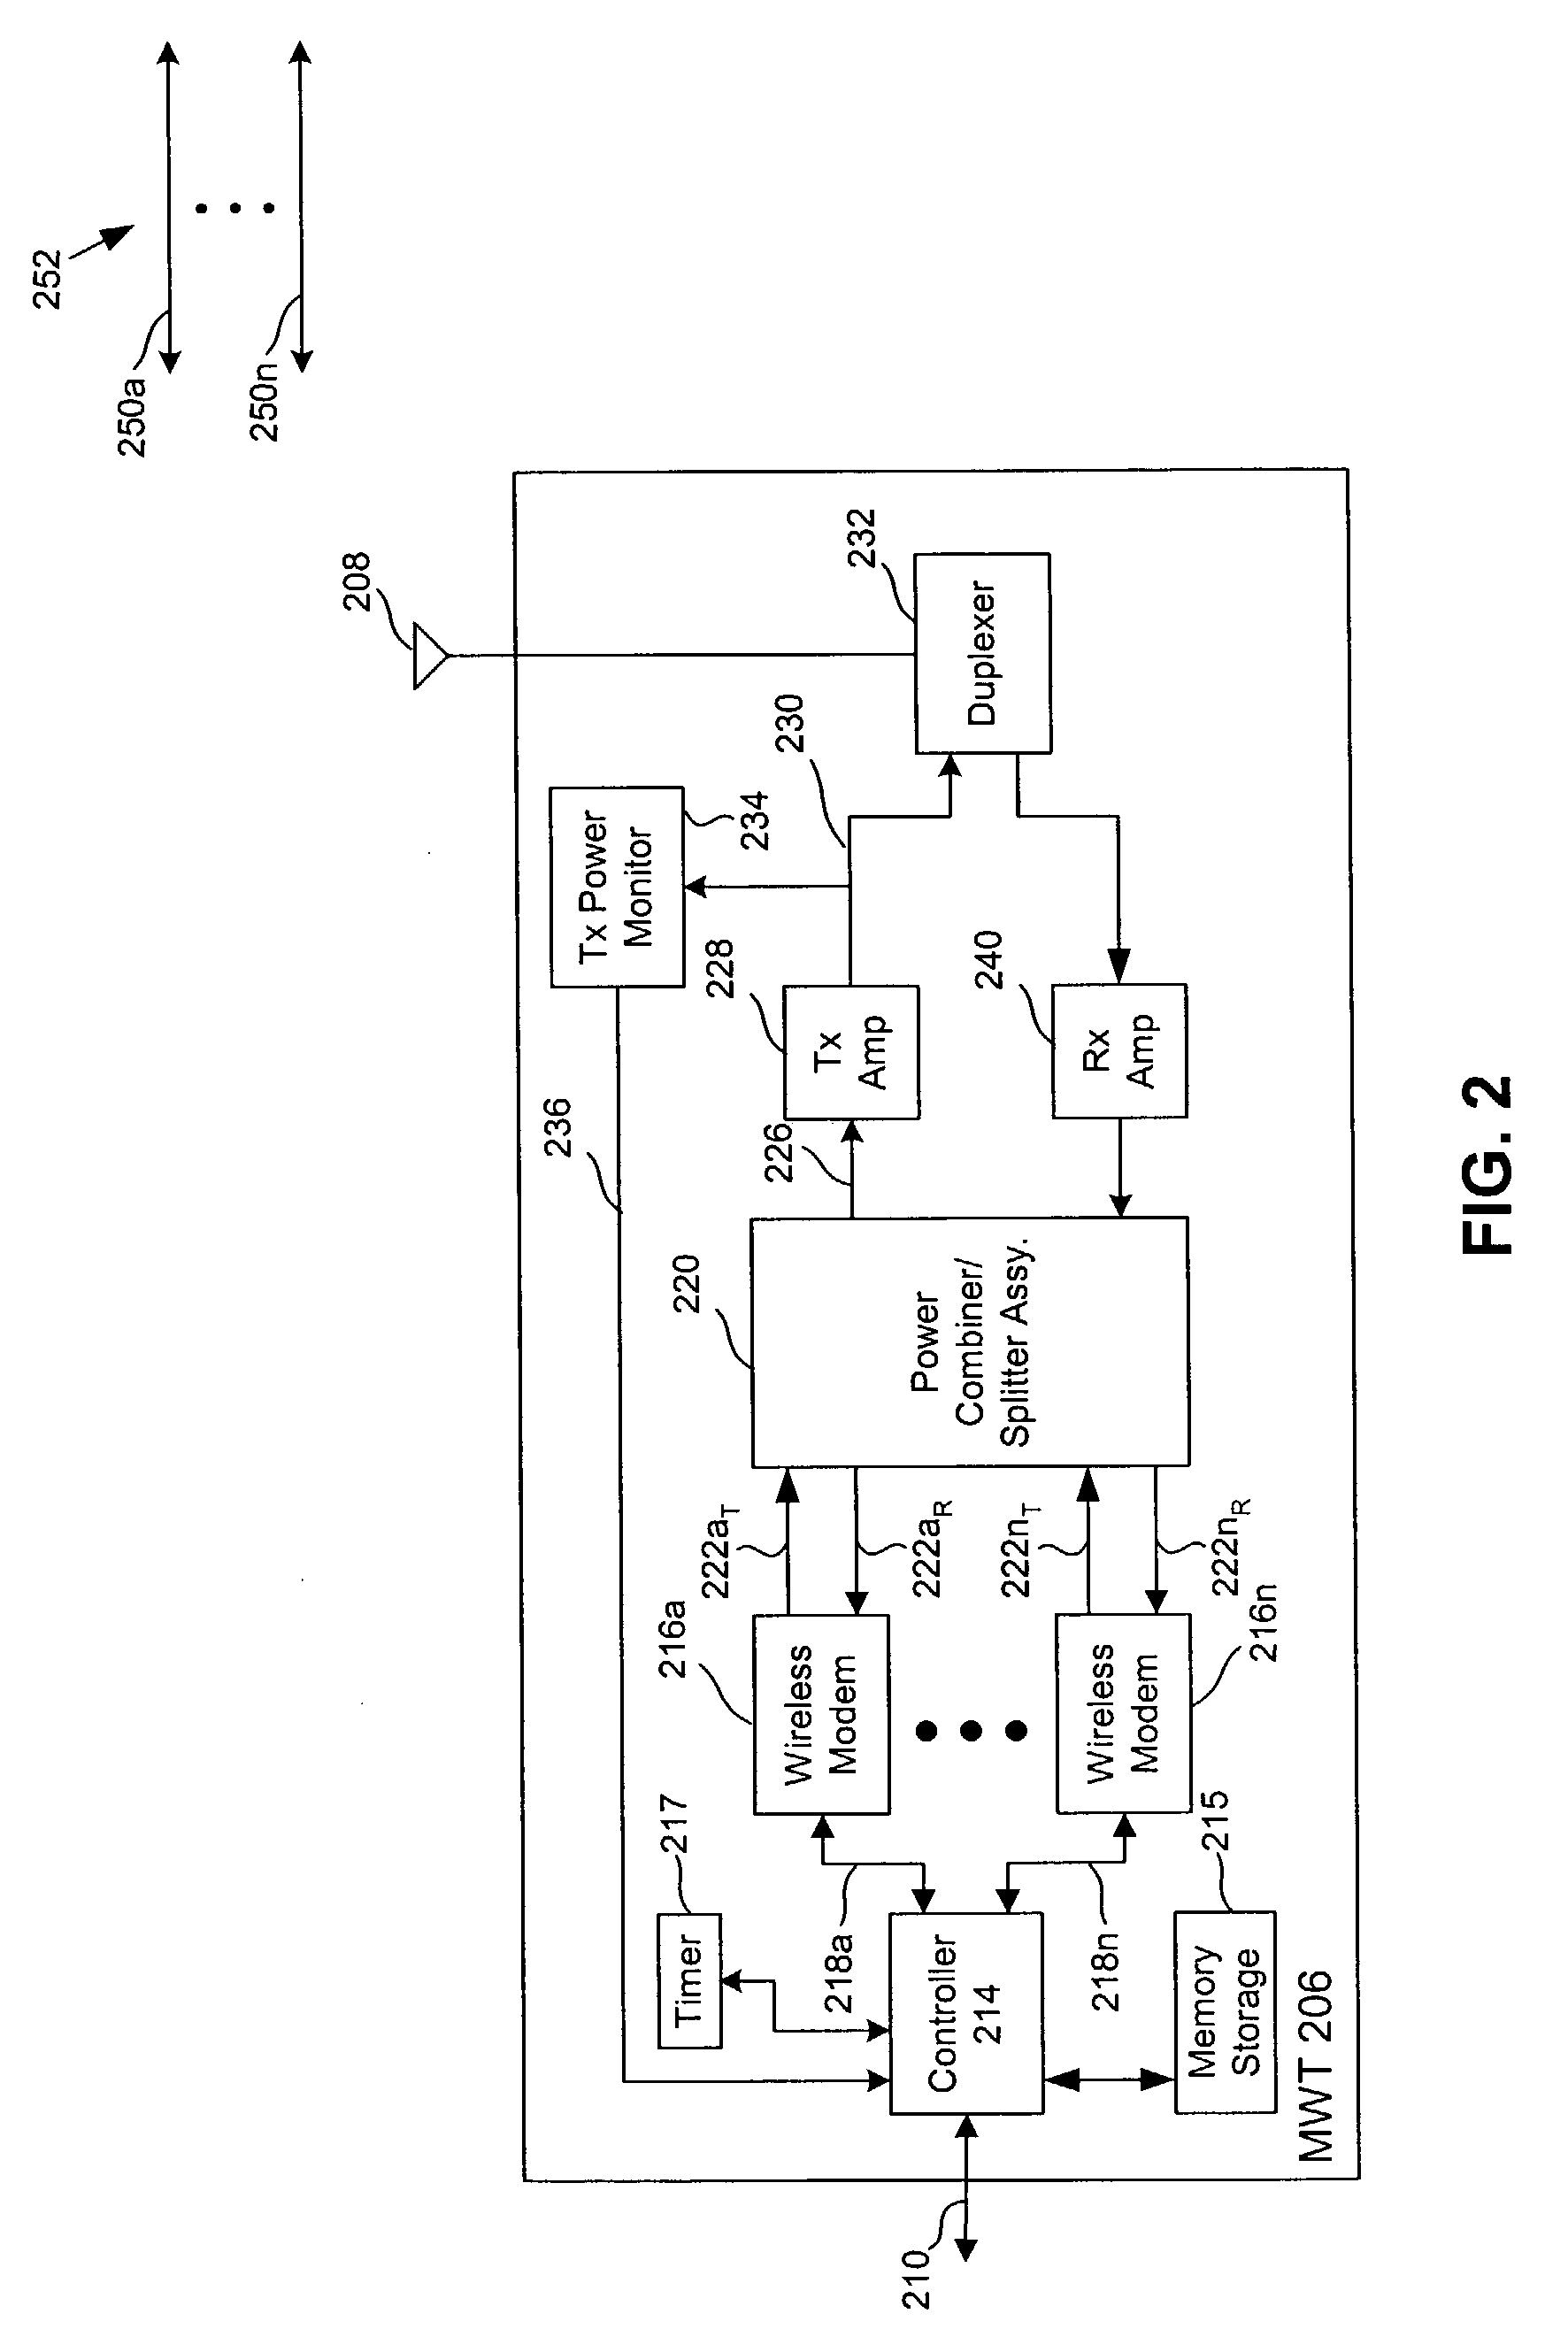 Controlling multiple modems in a wireless terminal using dynamically varying modem transmit power limits